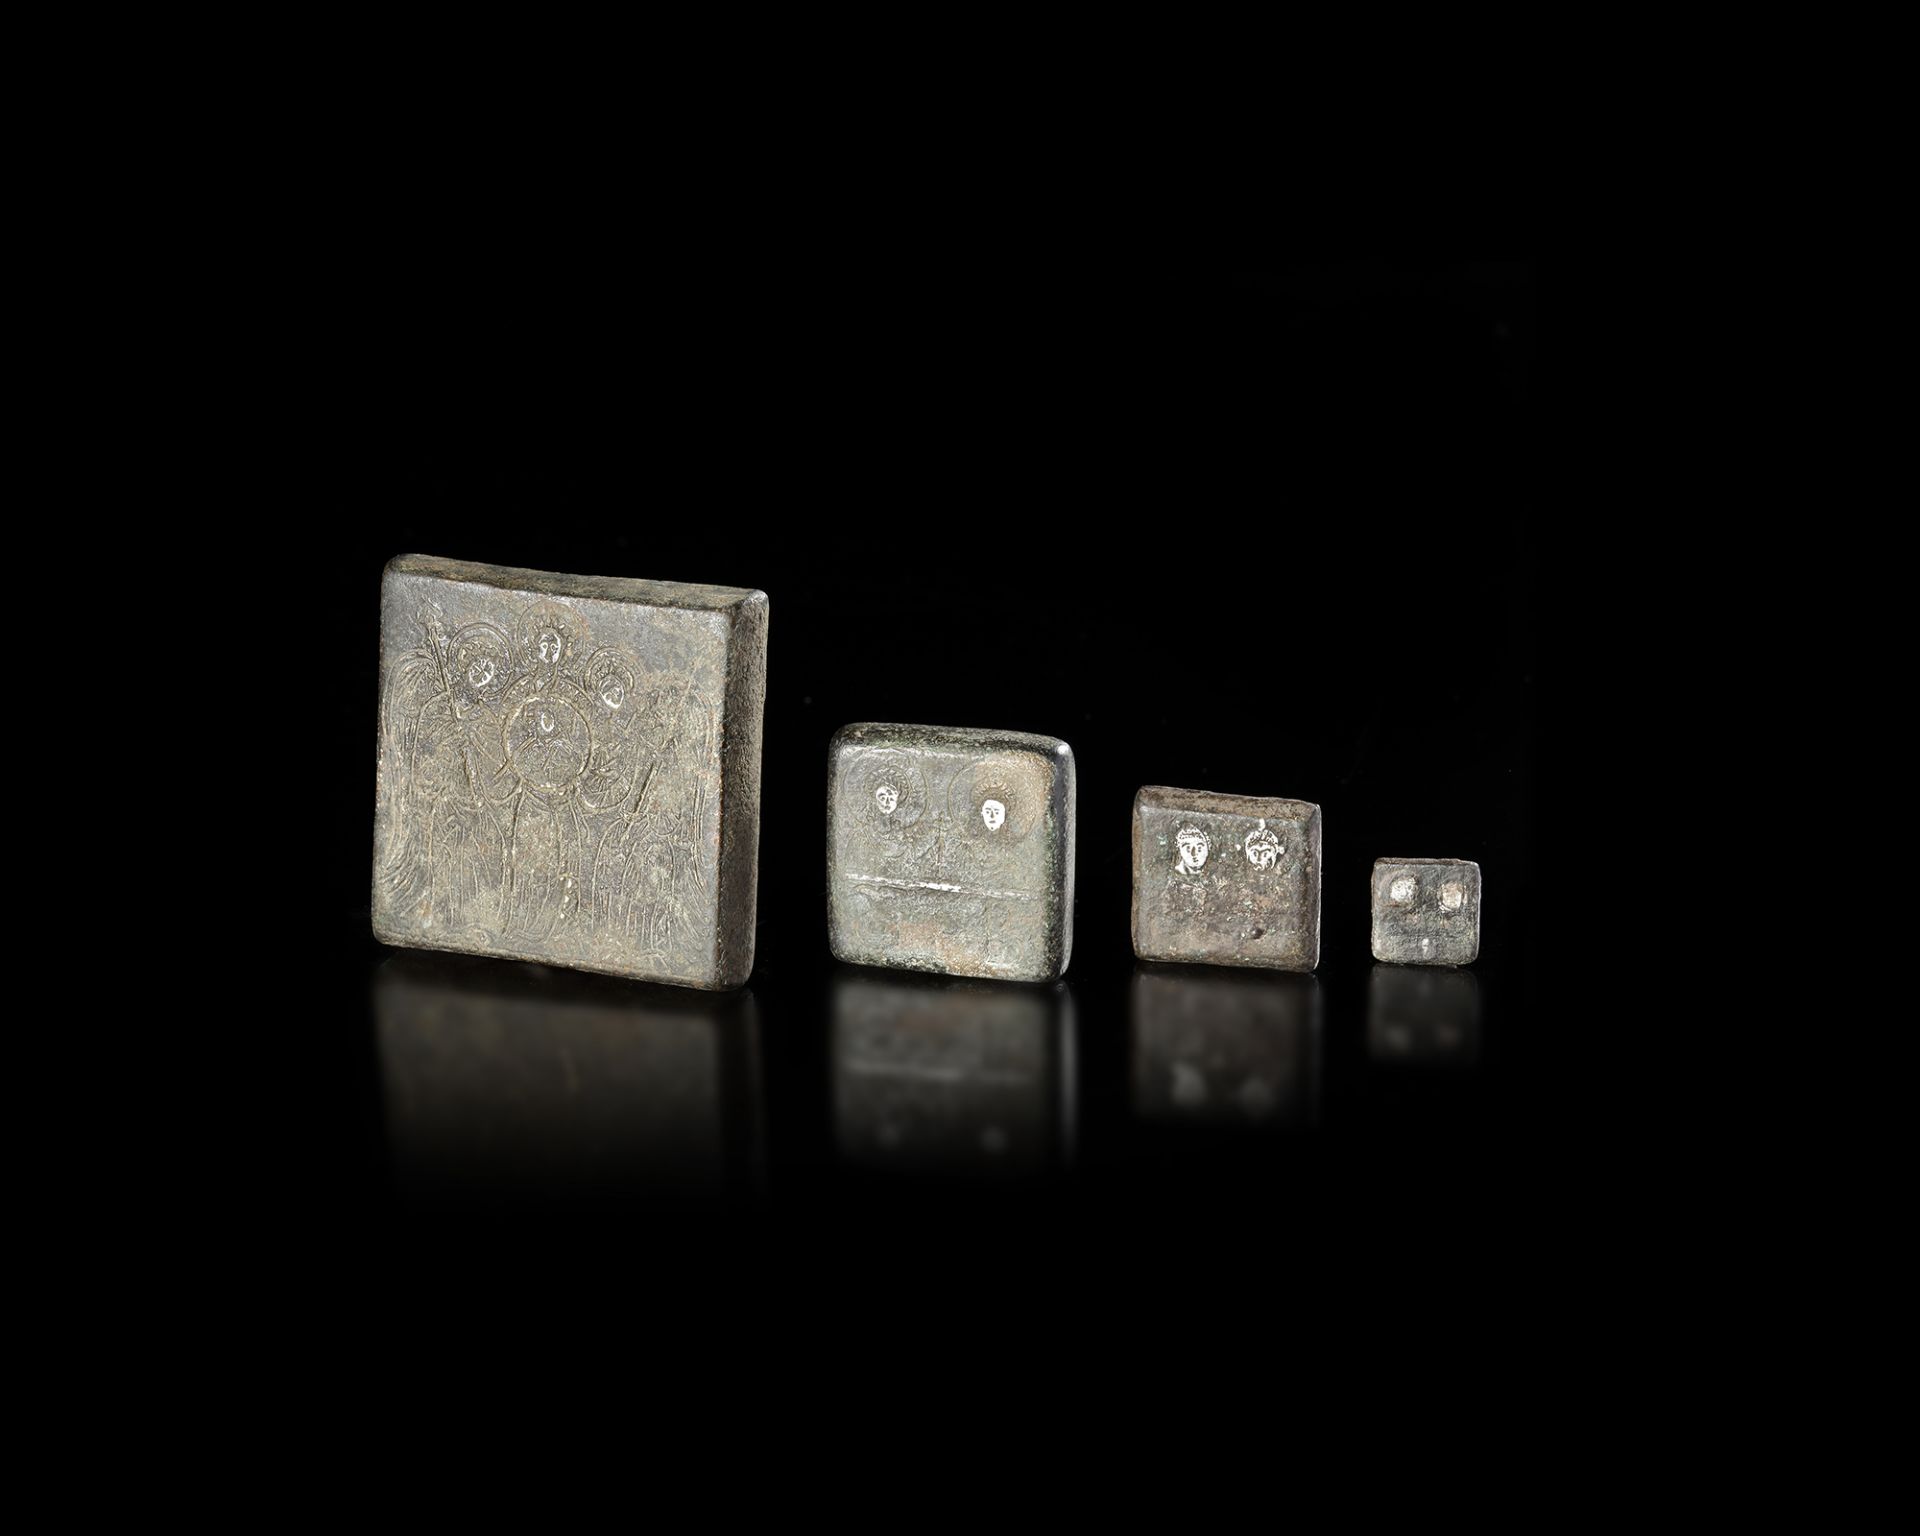 FOUR BYZANTINE COMMERCIAL WEIGHTS WITH SILVER INLAY, 5TH-7TH CENTURY AD - Image 2 of 4